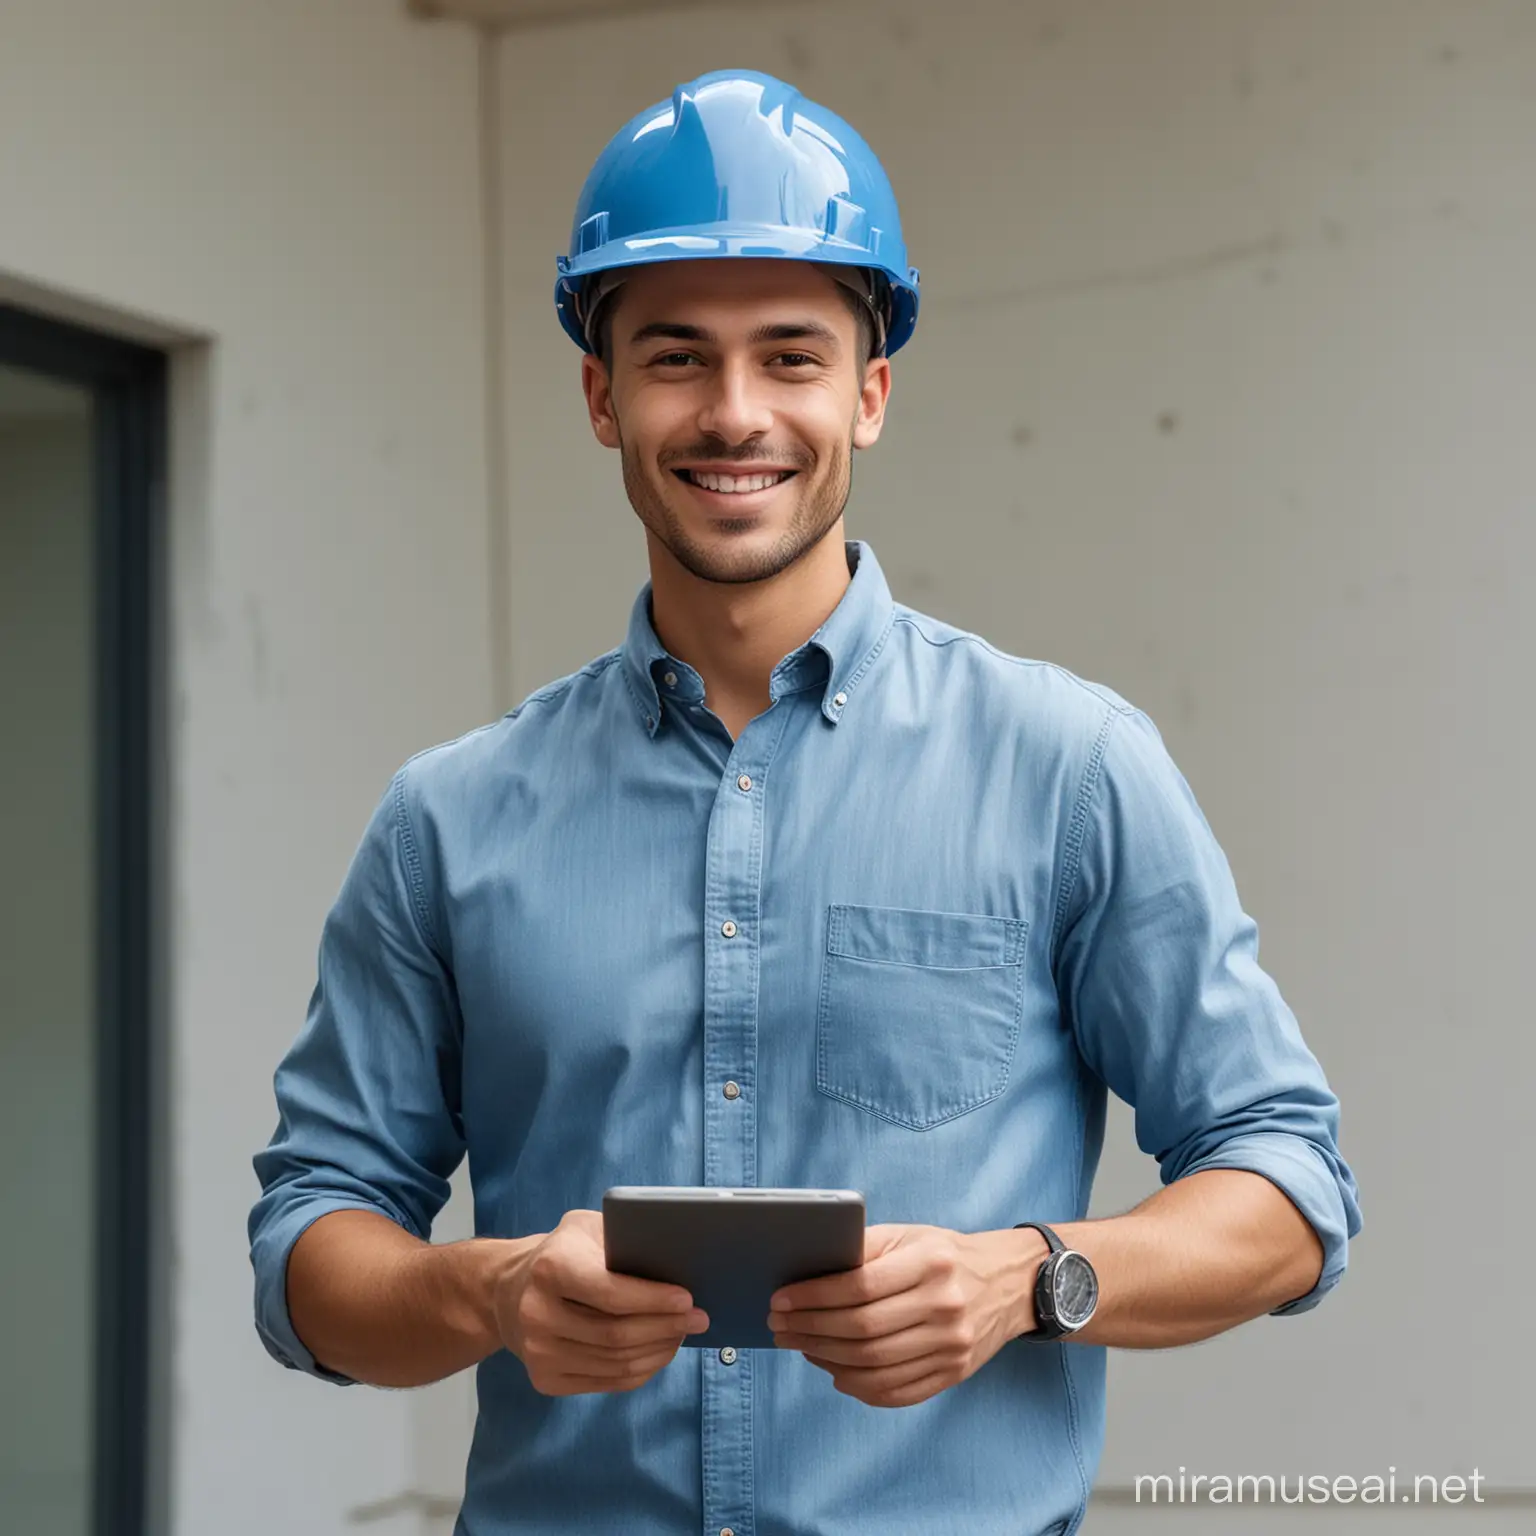 Young Man in Blue Shirt and Safety Helmet Using Tablet Outdoors